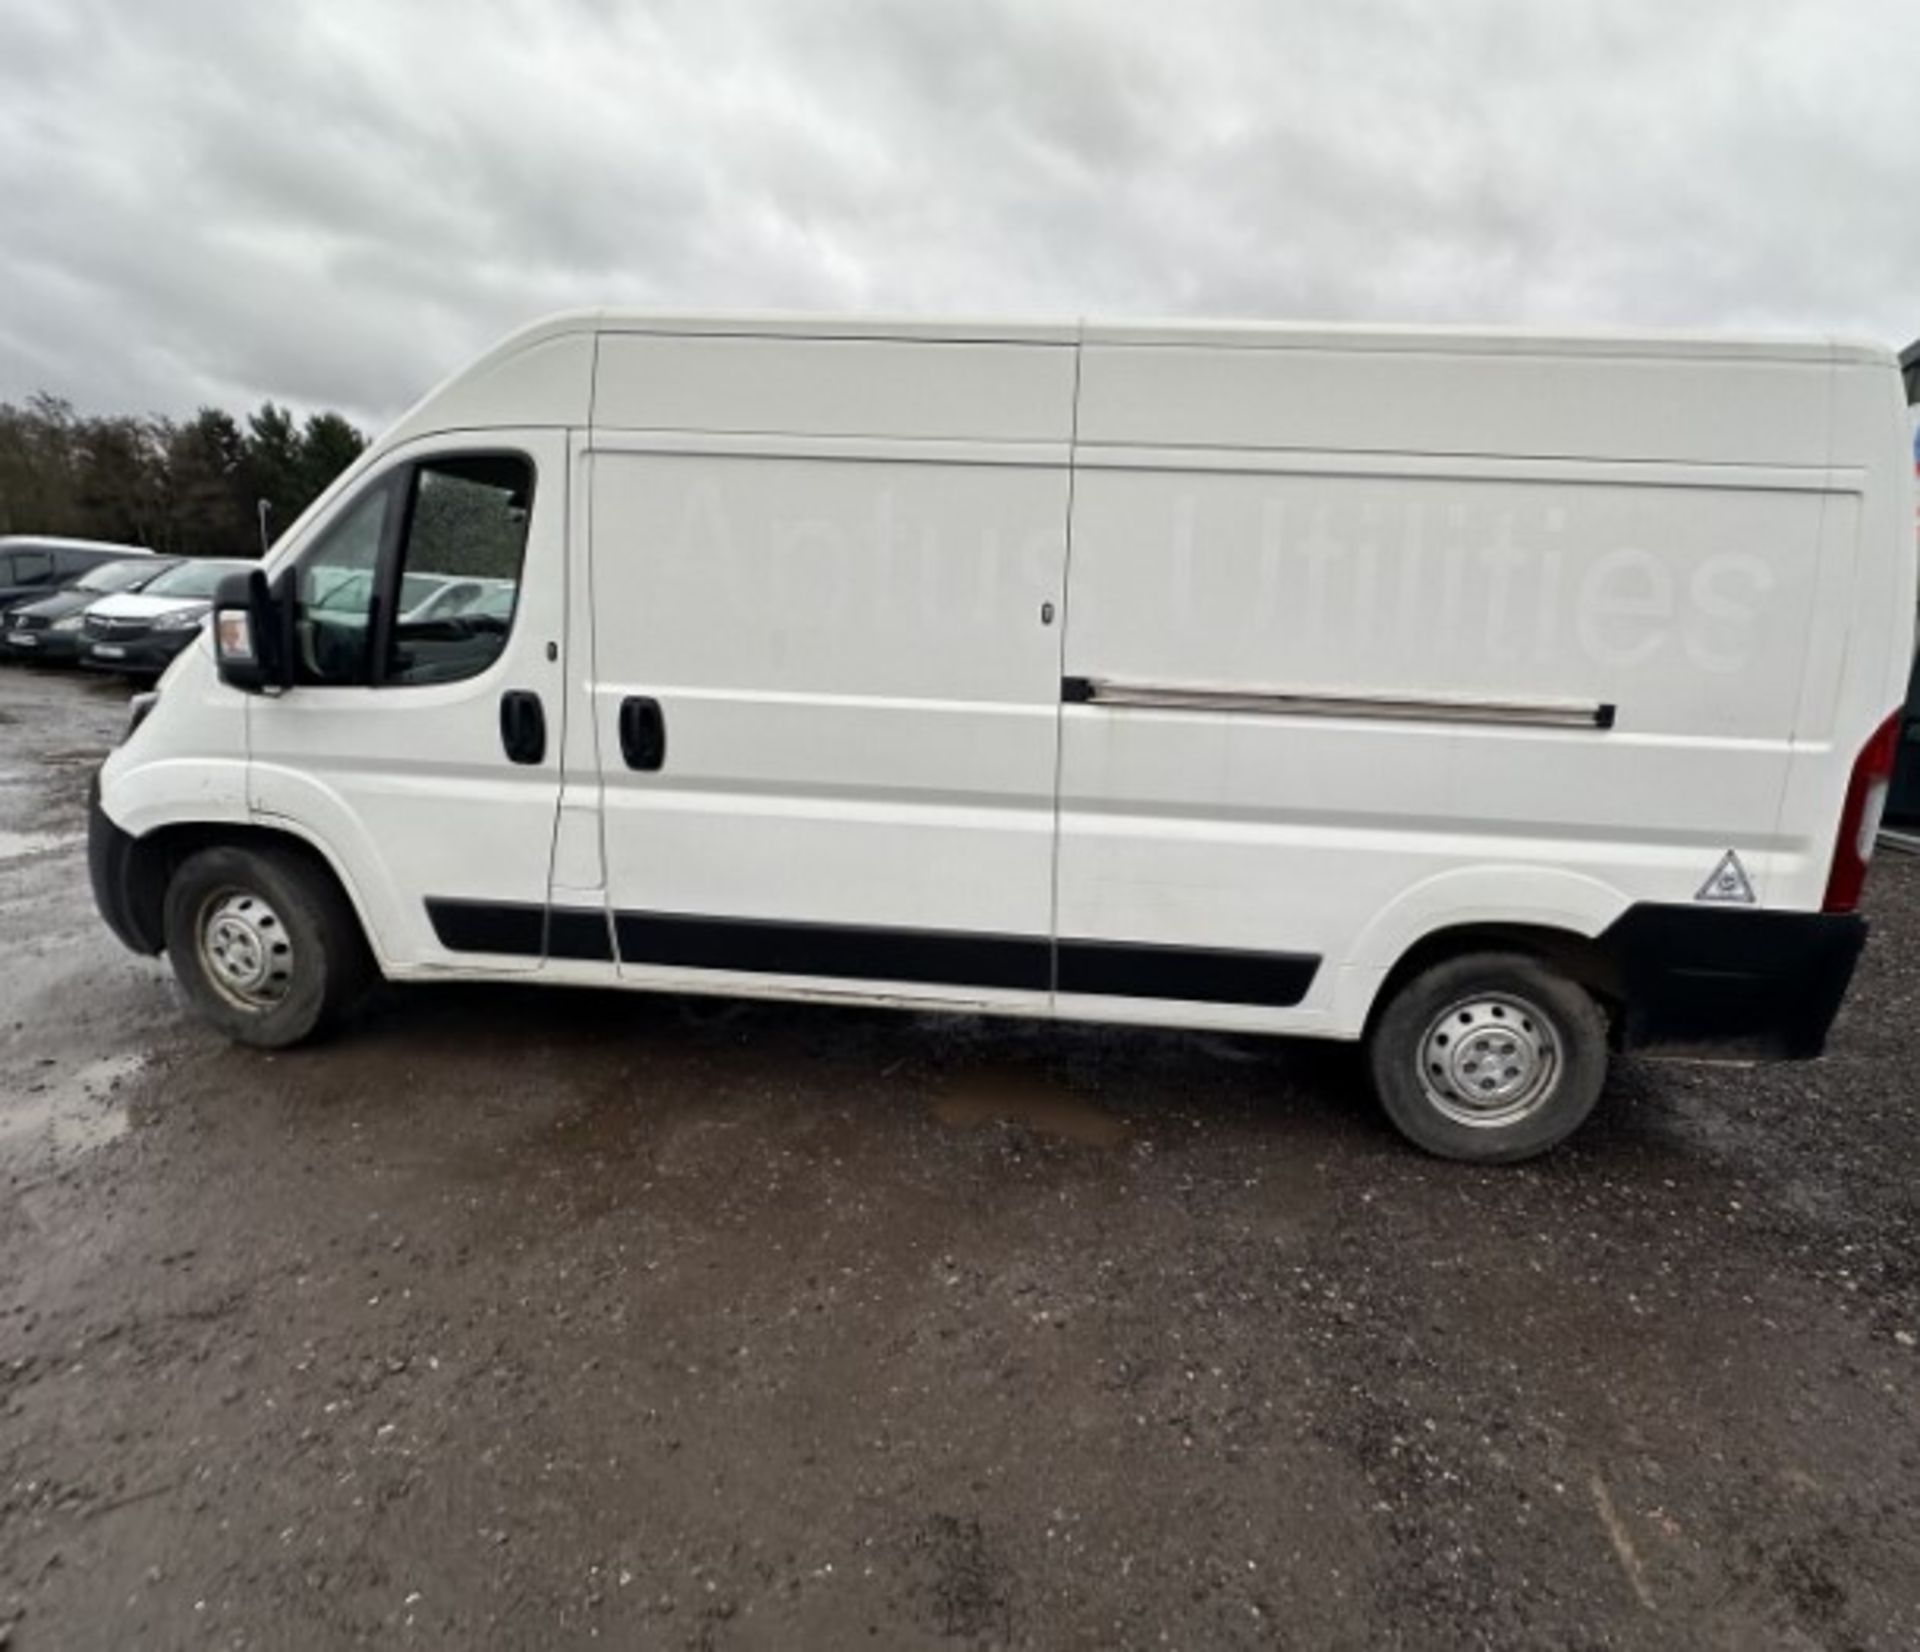 69 PLATE PEUGEOT BOXER: BLUE HDI POWER, READY FOR DUTY - Image 4 of 19